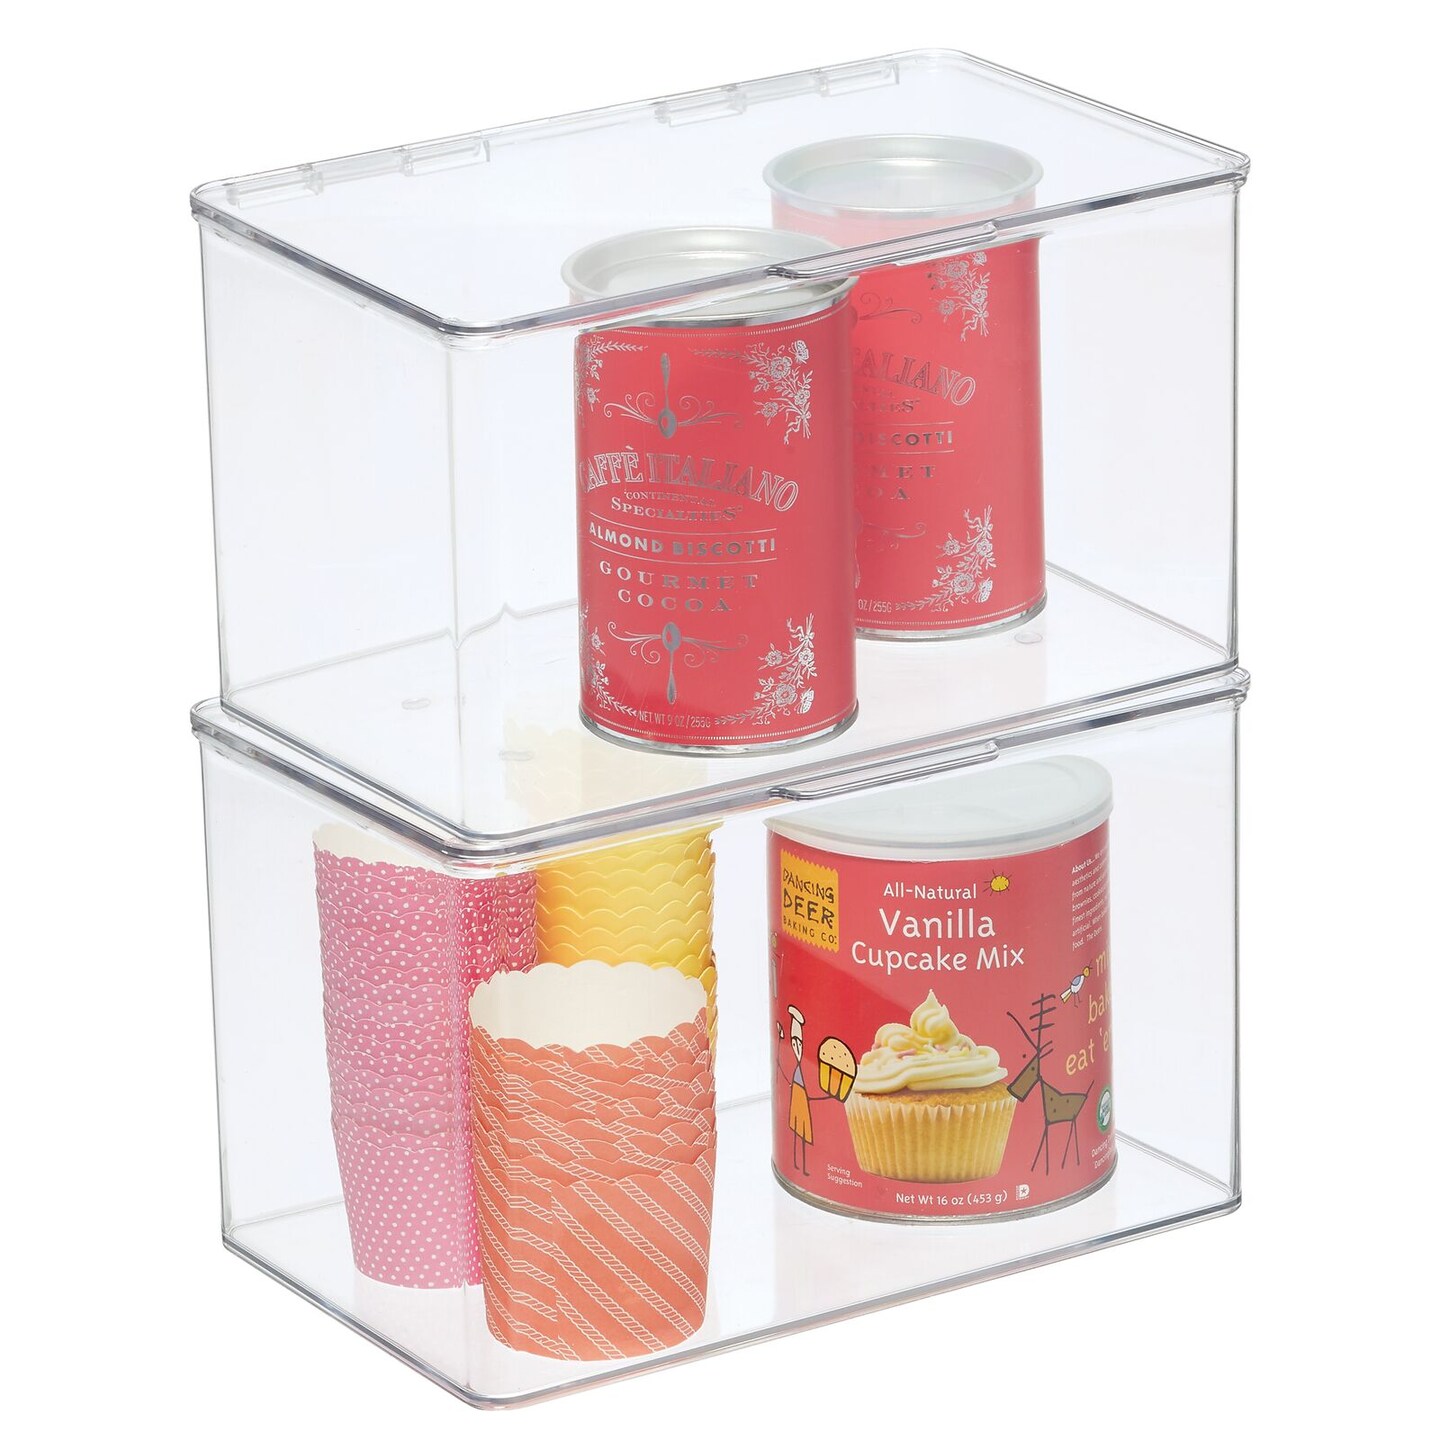 Clear Stacking Food Storage Organizer Bins for Kitchen and Pantry - mDesign  